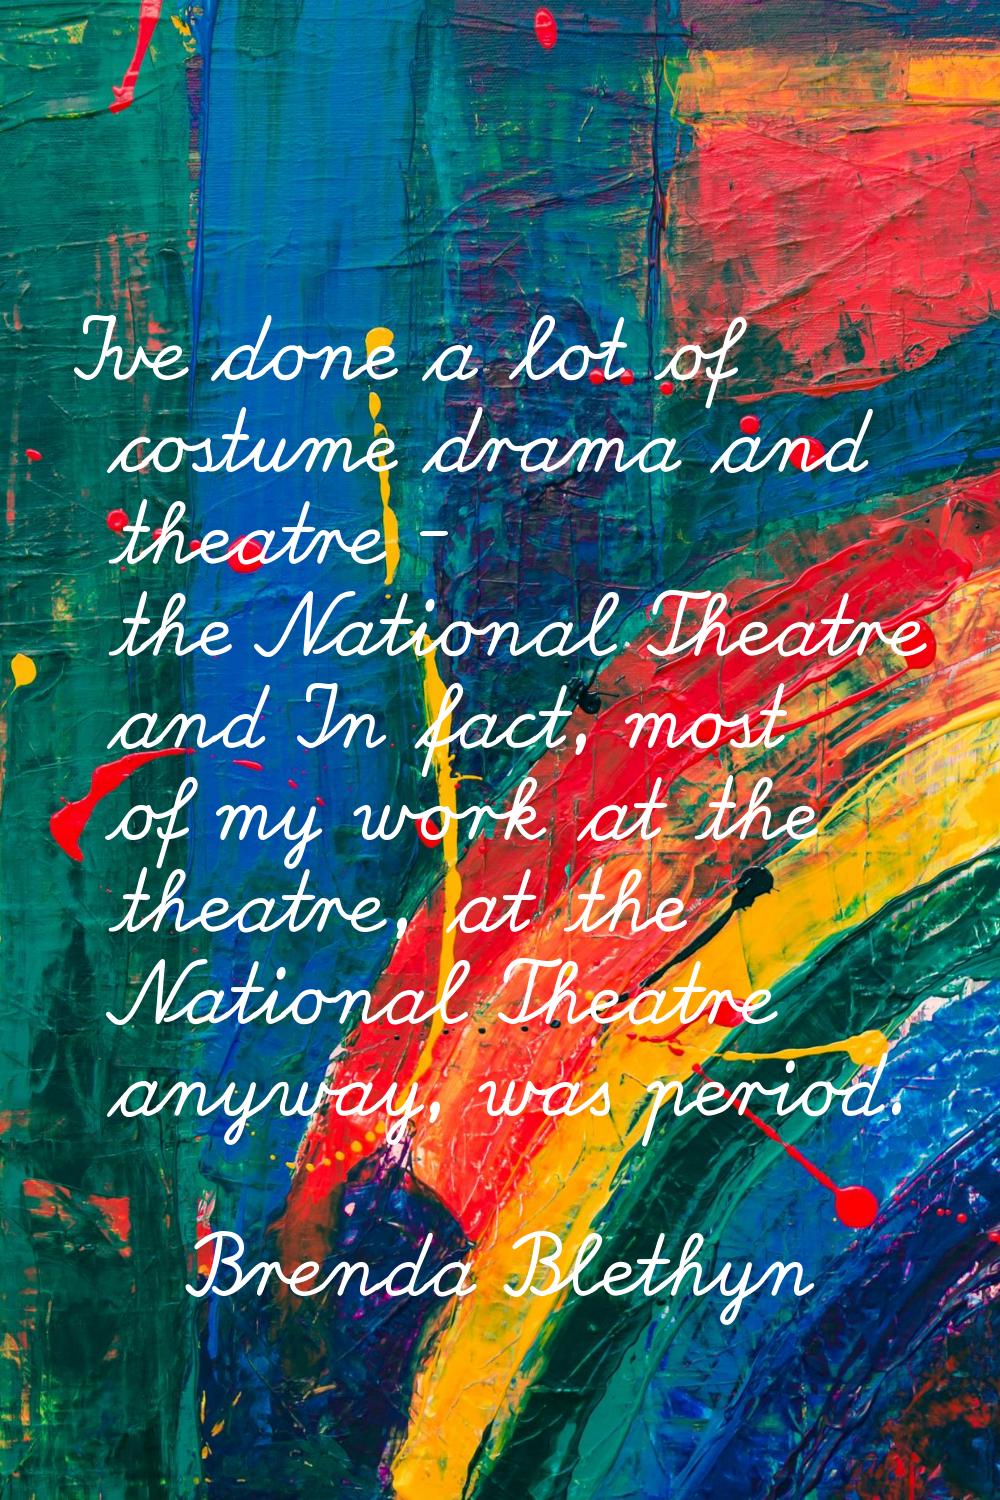 I've done a lot of costume drama and theatre - the National Theatre and In fact, most of my work at